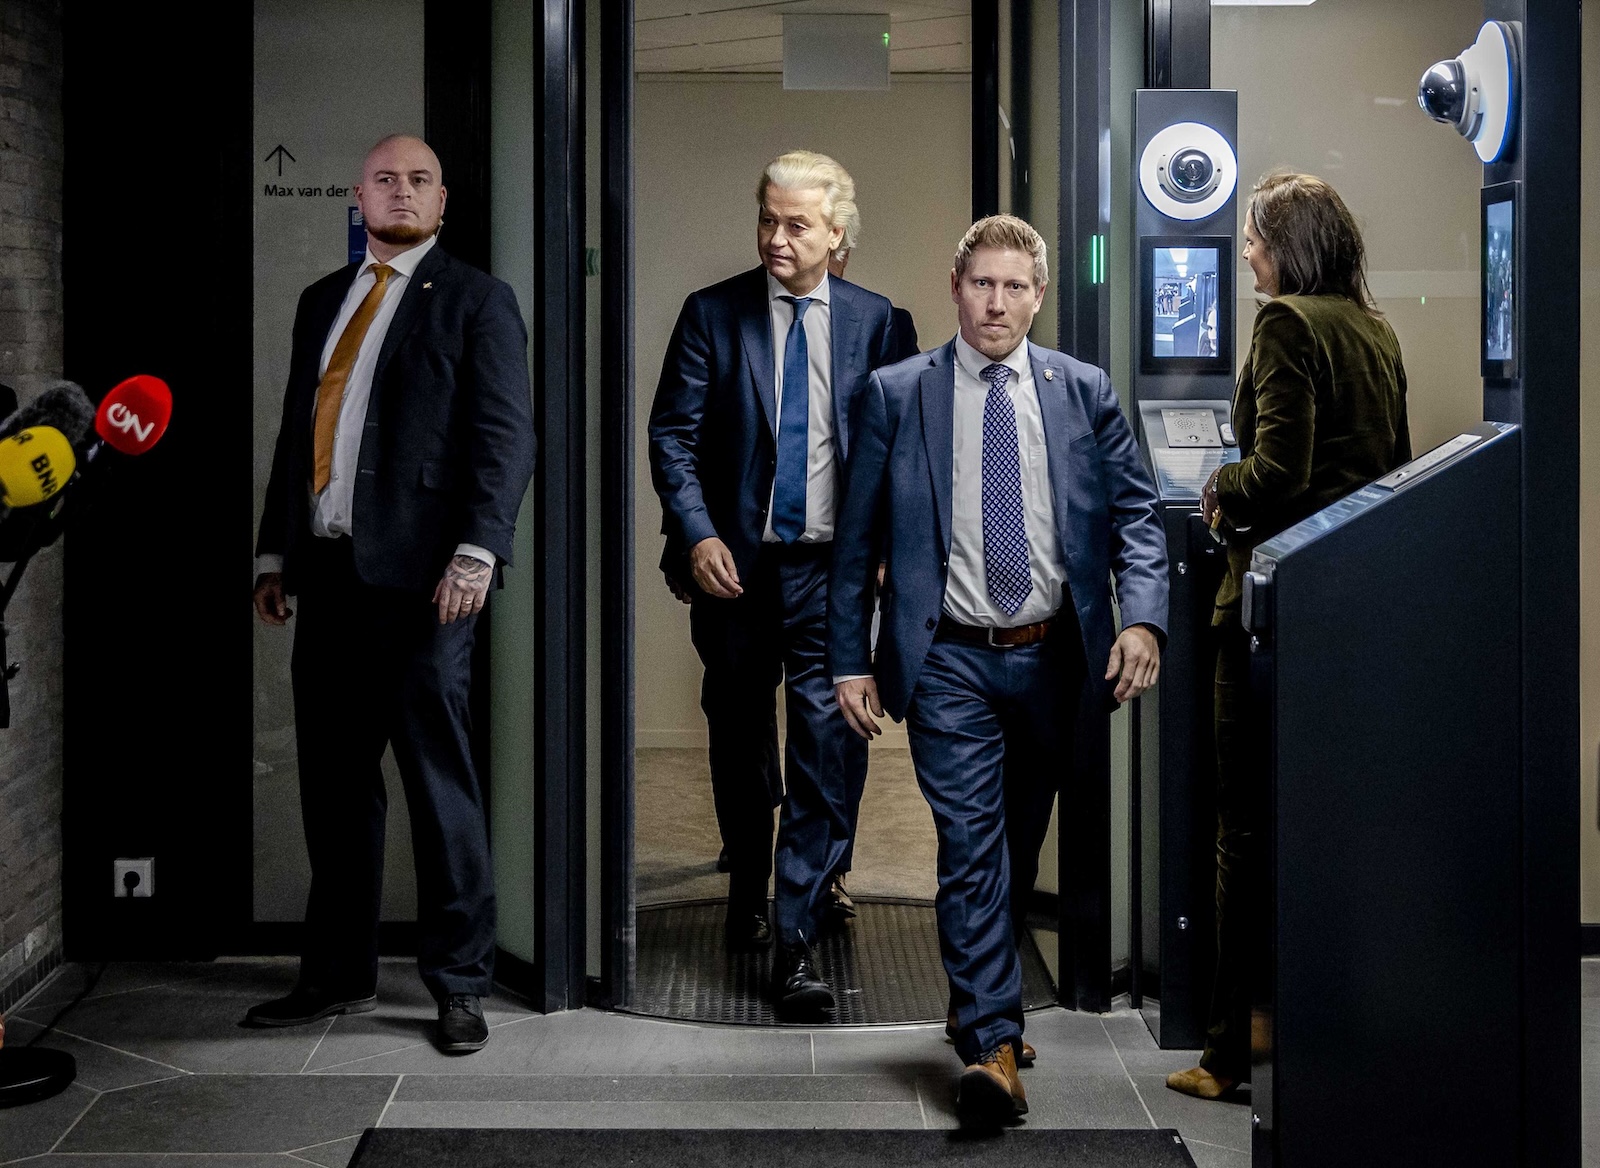 epa11013956 Party leader Geert Wilders (C) of the PVV walks after a conversation with party leader Pieter Omtzigt of New Social Contract (NSC) and scout Ronald Plasterk in The Hague, The Netherlands, 06 December 2023, as part of the formation talks about a possible government participation.  EPA/REMKO DE WAAL